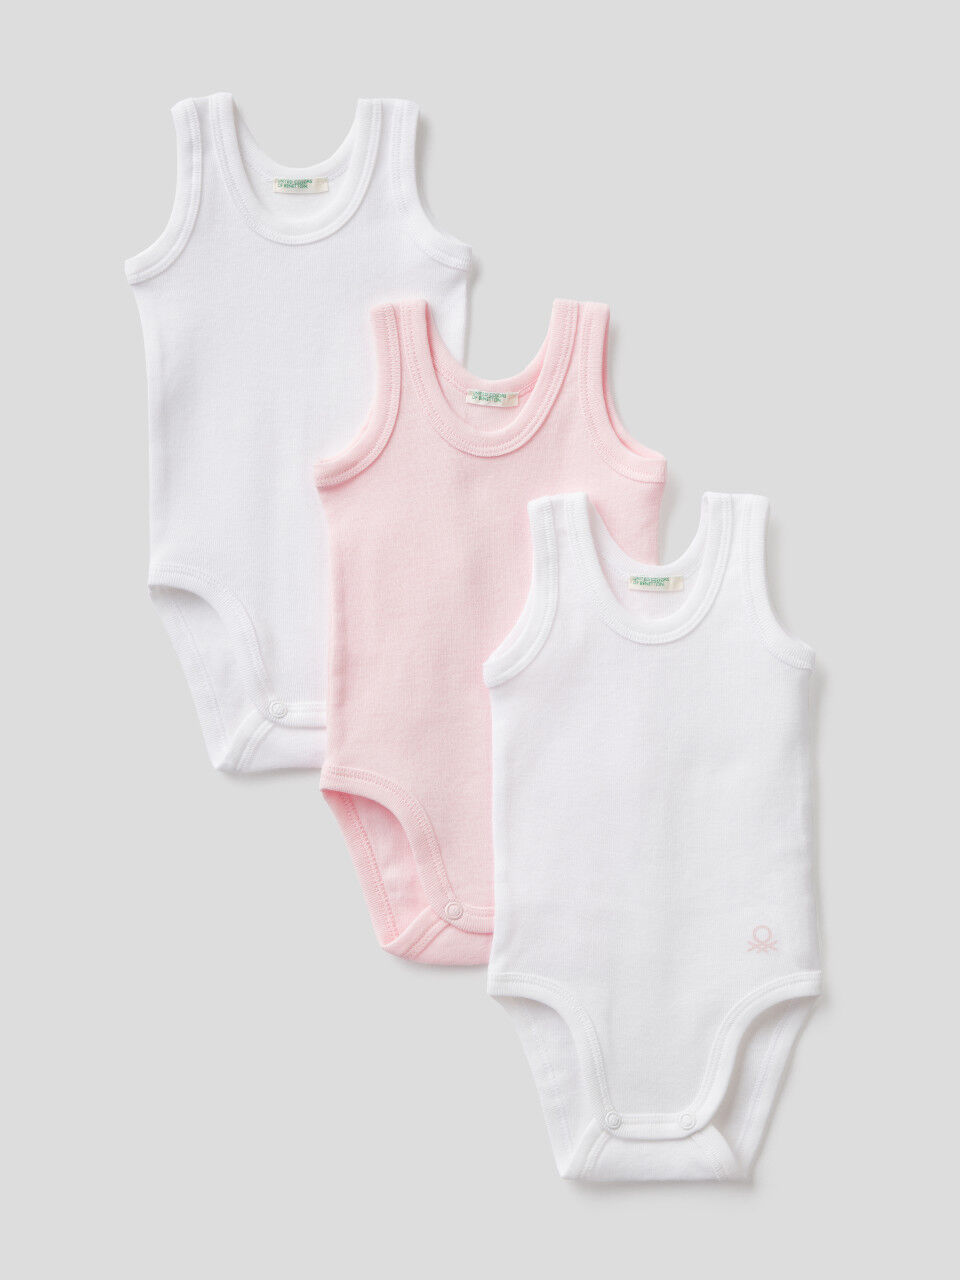 Three tank top bodysuits in solid color